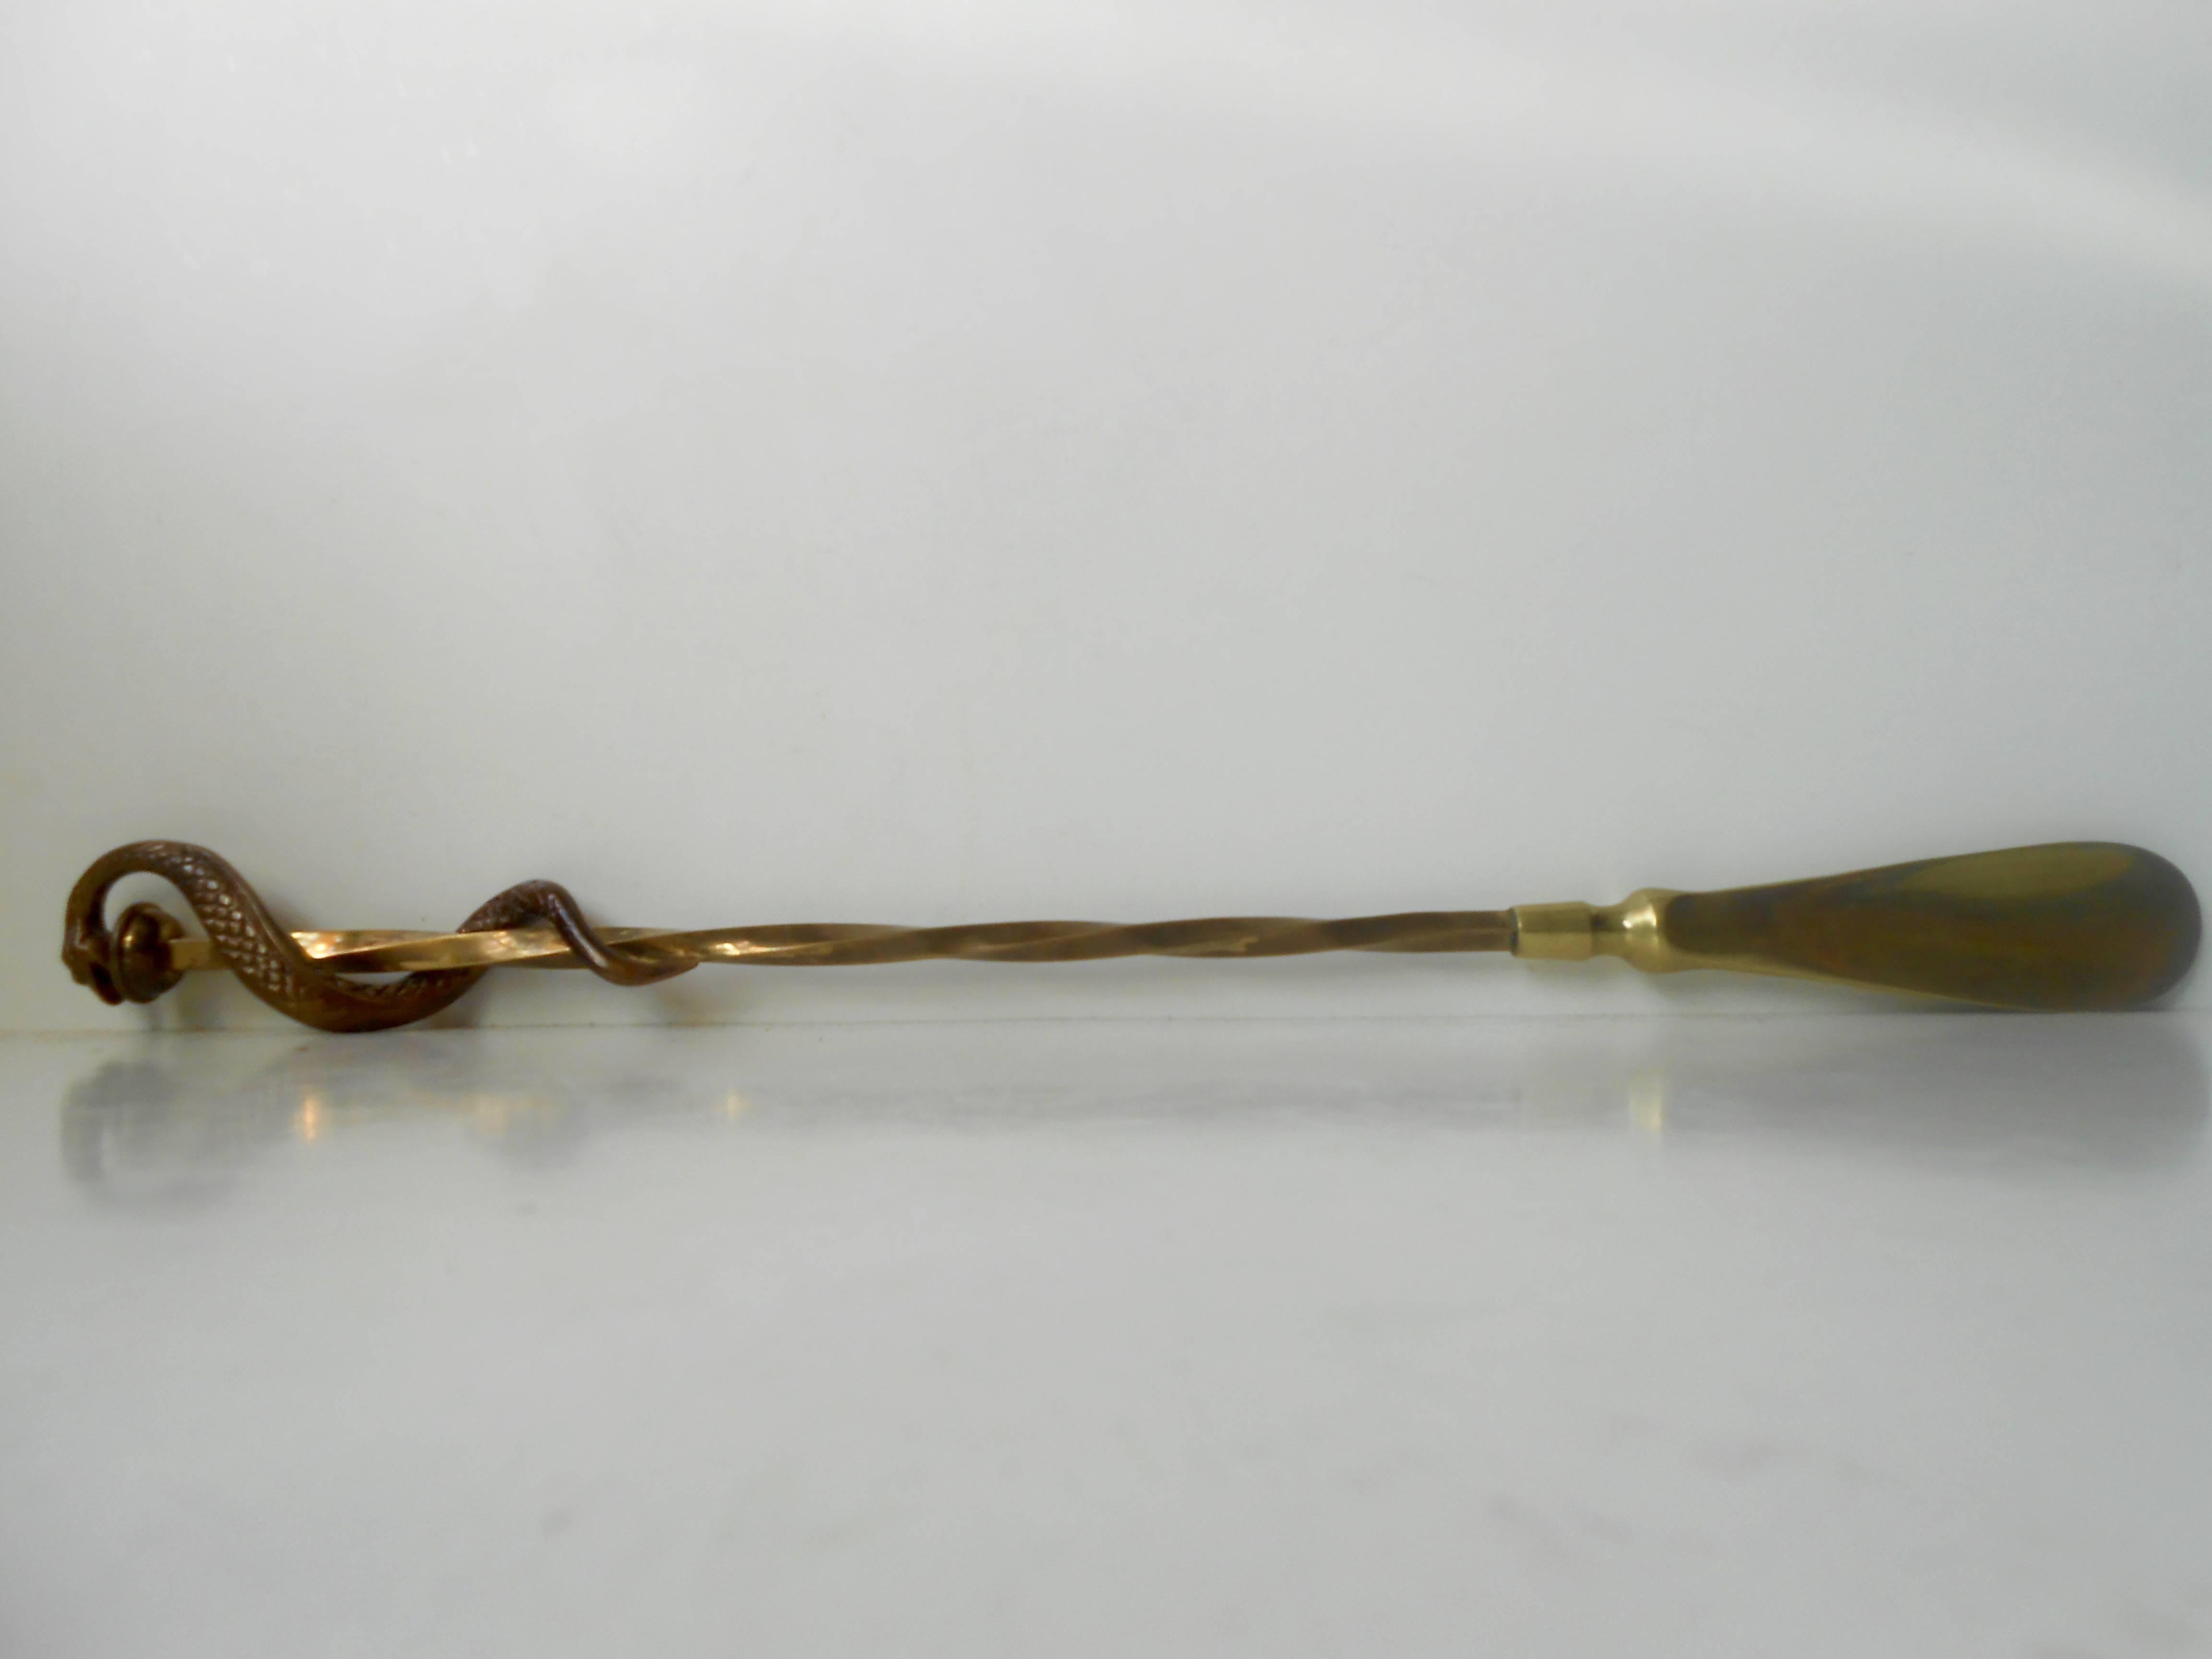 Ornate and stylistically unusual long handled shoe horn made of solid brass. The handle or top has a coiling bronze snake (6 inch in length). It was made in Europe during the 1930s by anonymous maker.